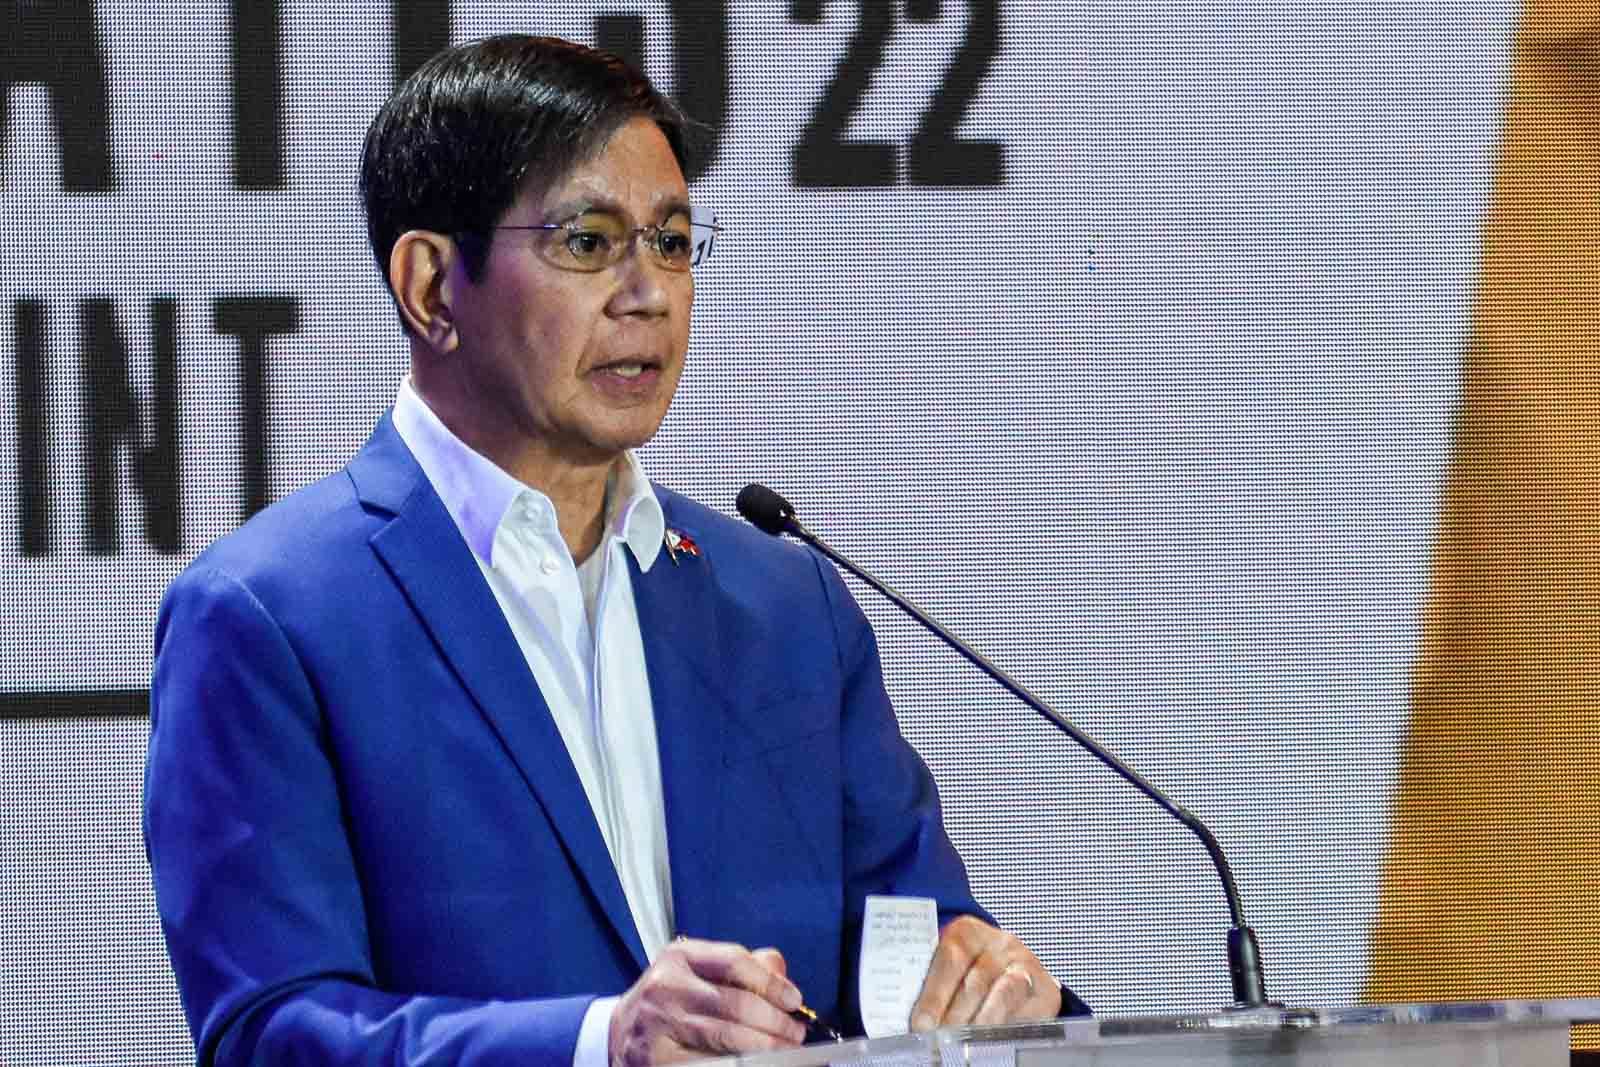 Lacson: With Martial Law past, PH should lead in human rights